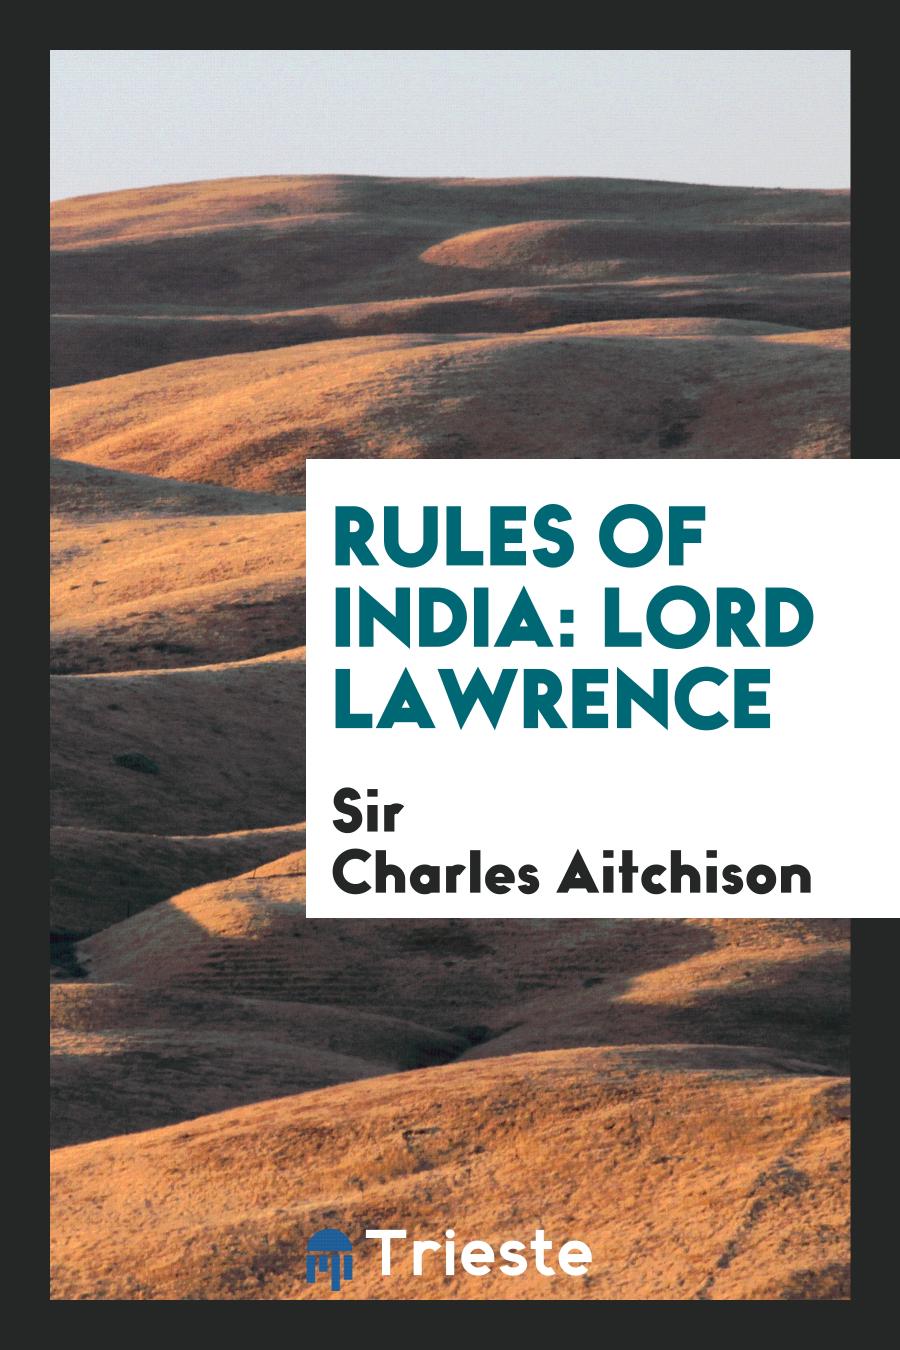 Rules of India: Lord Lawrence